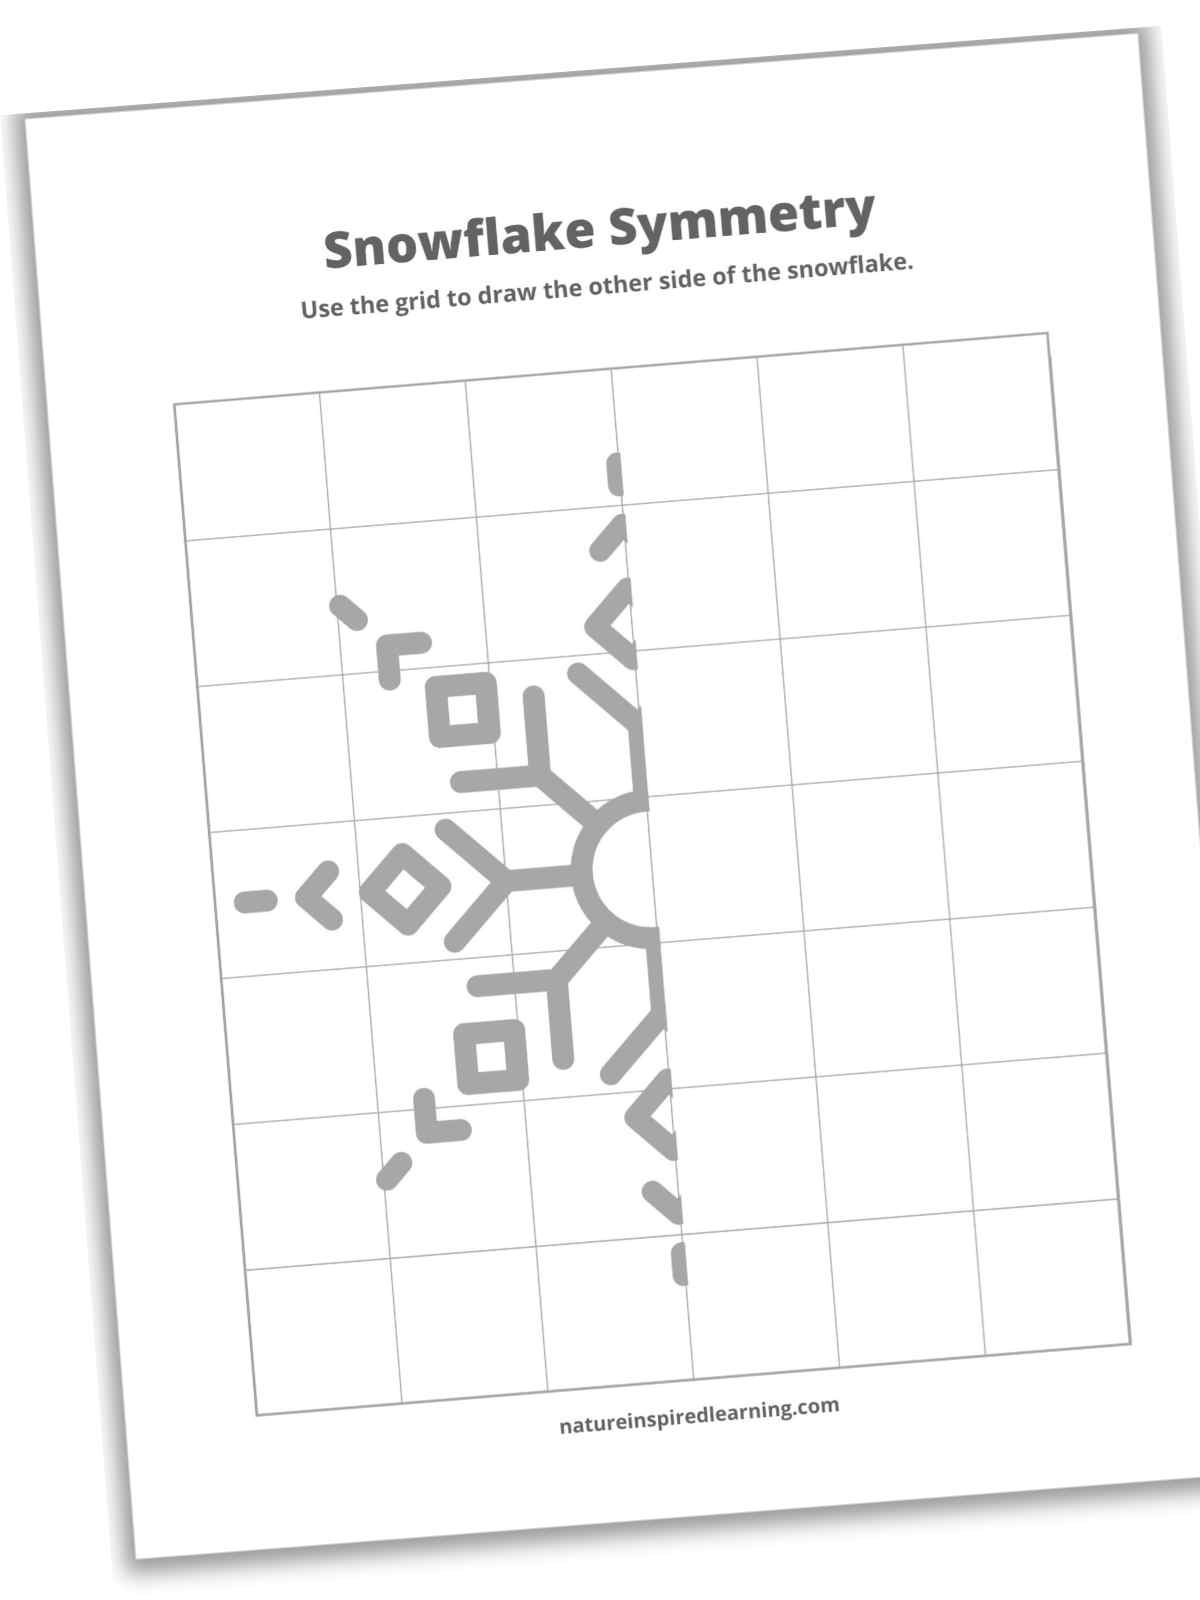 printable slanted with half of a snowflake design on grid paper in black and white